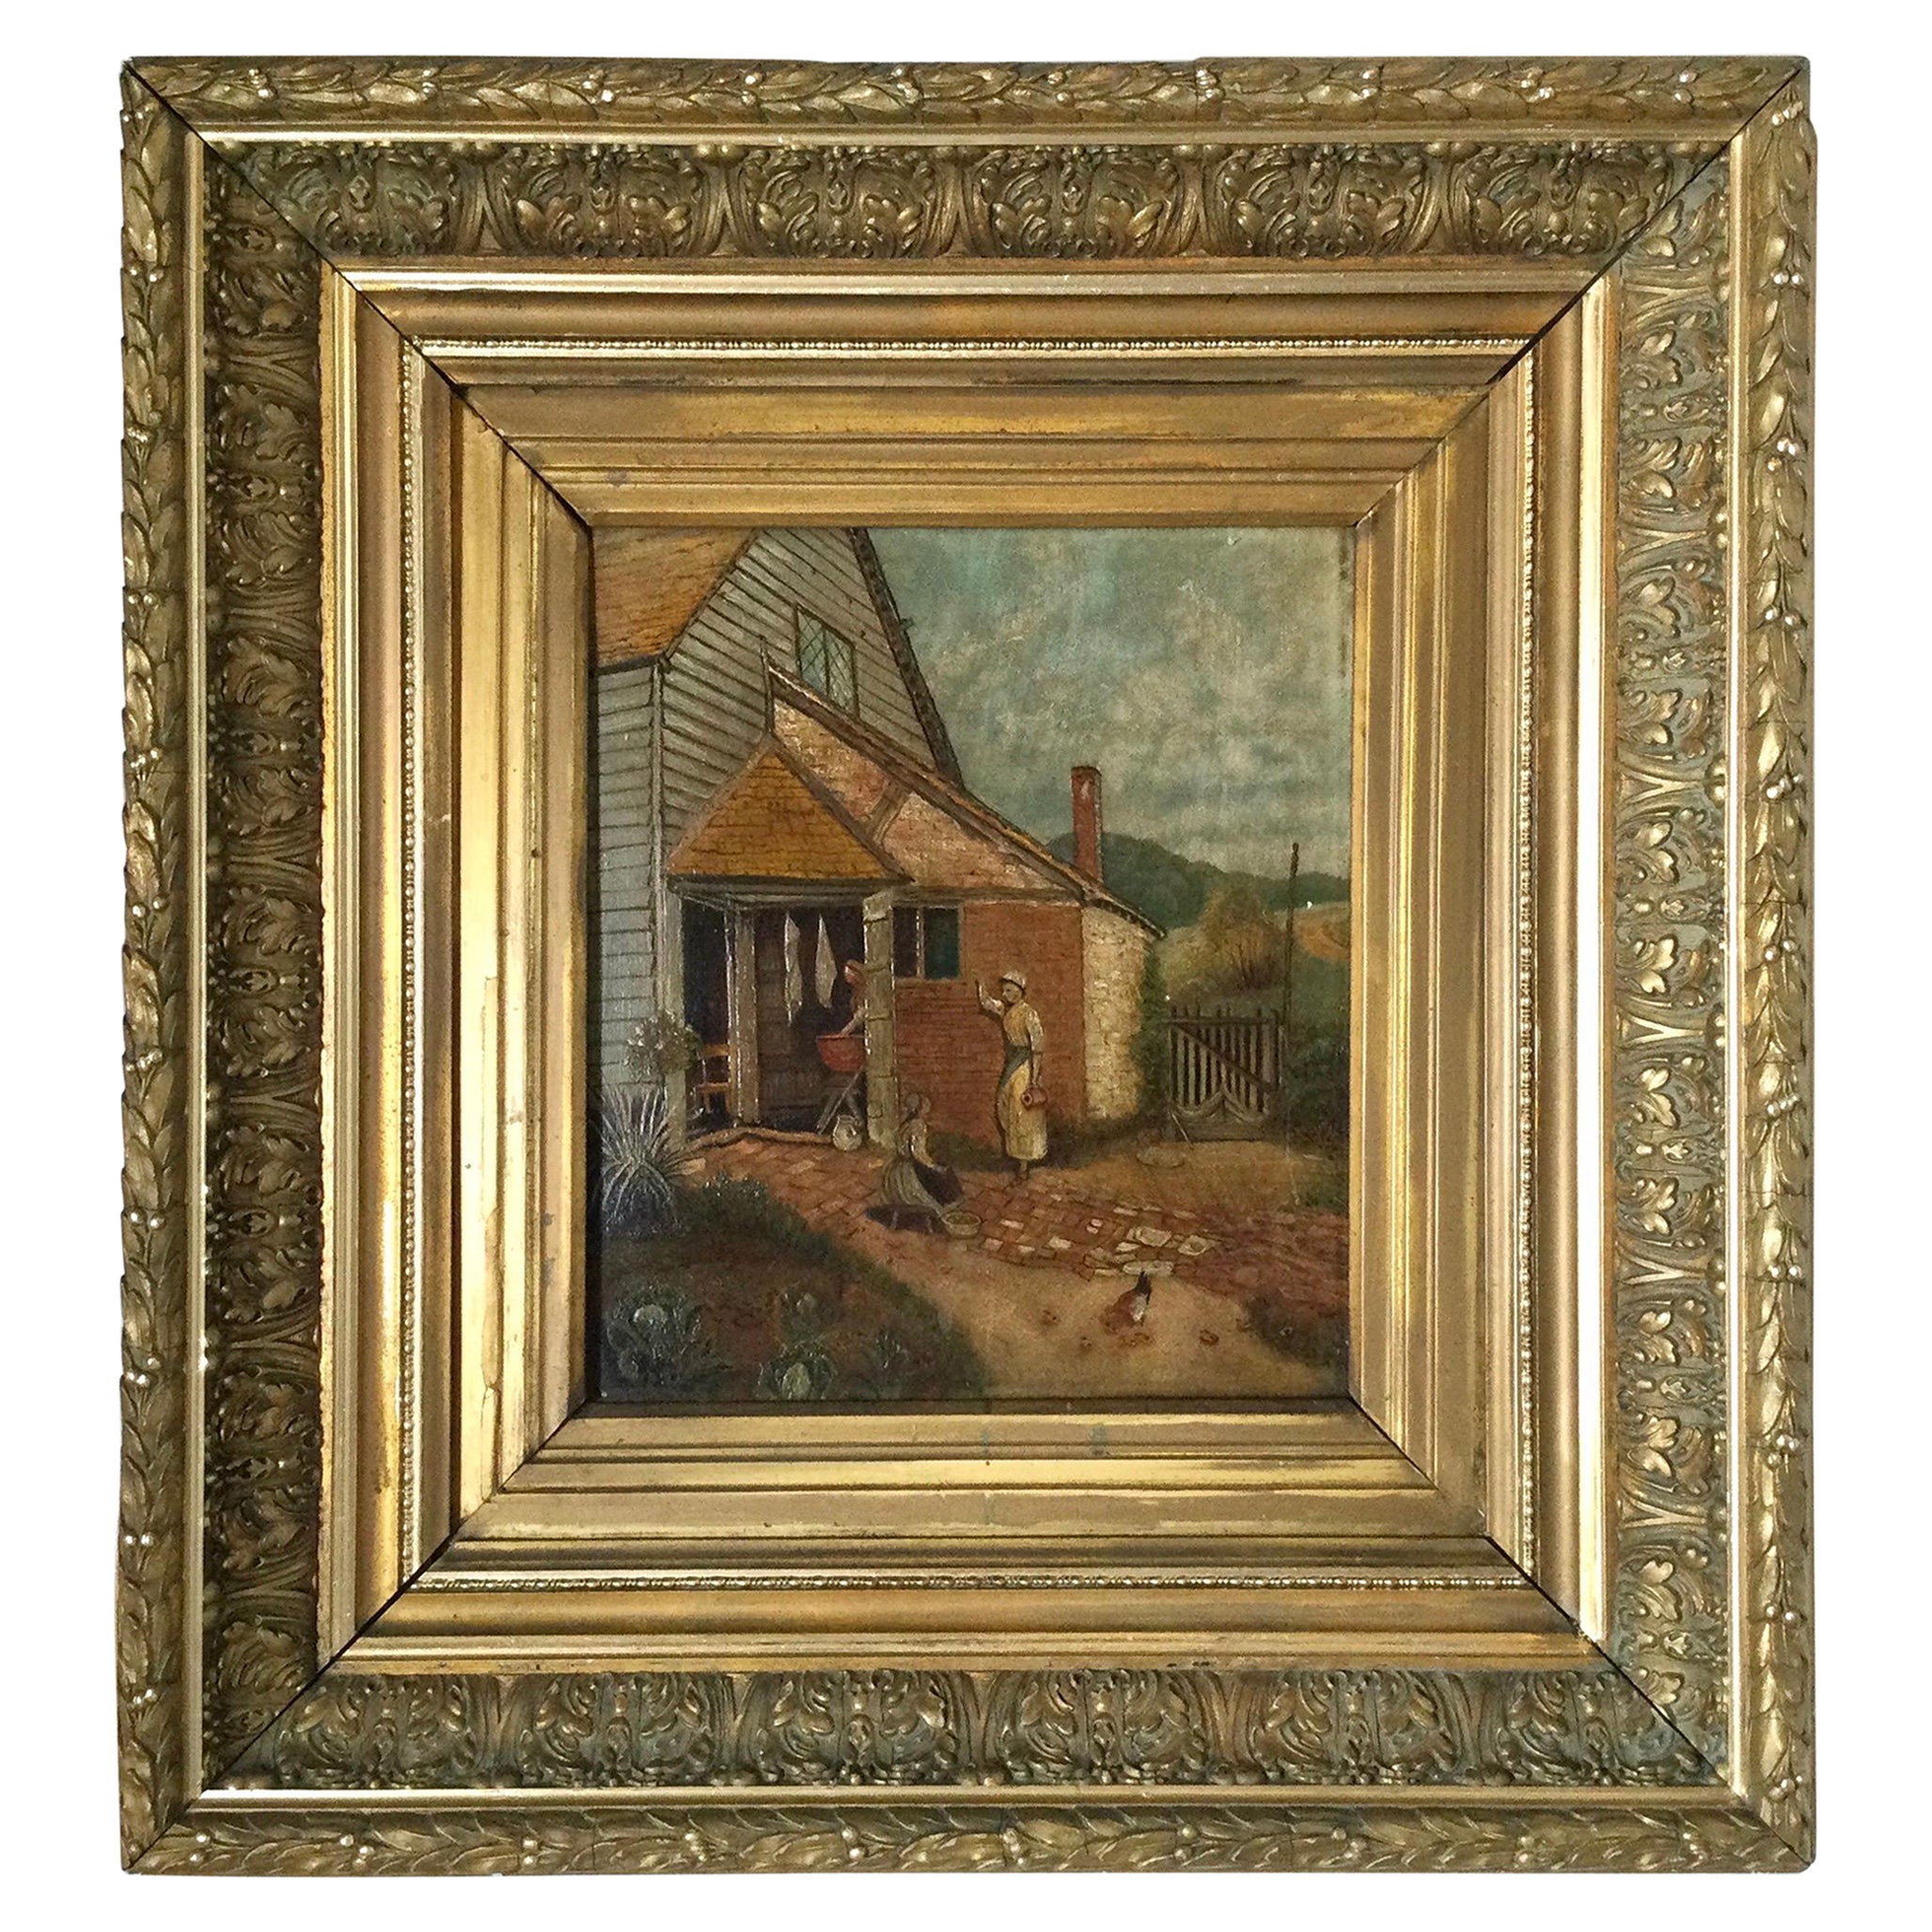 Antique 19th Century Oil on Board in Elaborate Gilt Frame